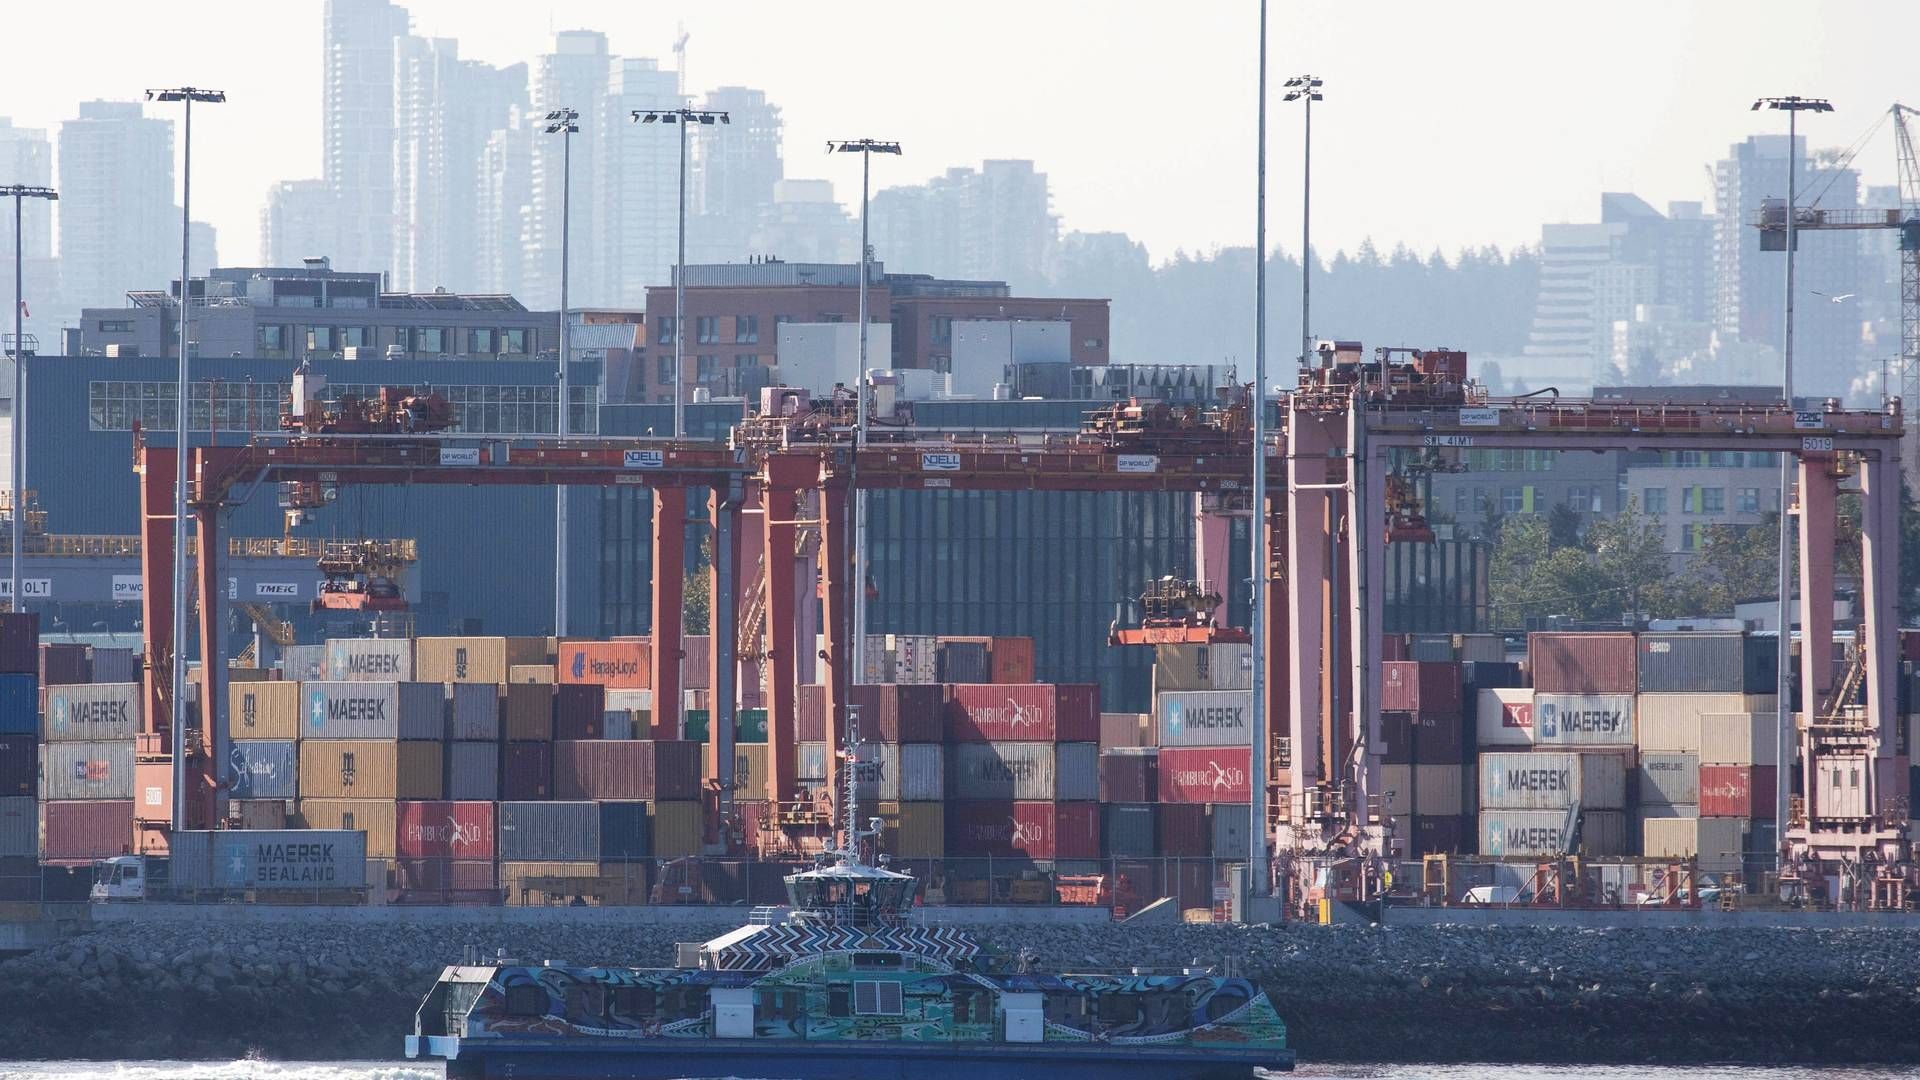 Port of Vancouver, a key port on Canada's west coast, where dockworkers are locked in a collective bargaining dispute with employers. | Photo: Chris Helgren/Reuters/Ritzau Scanpix